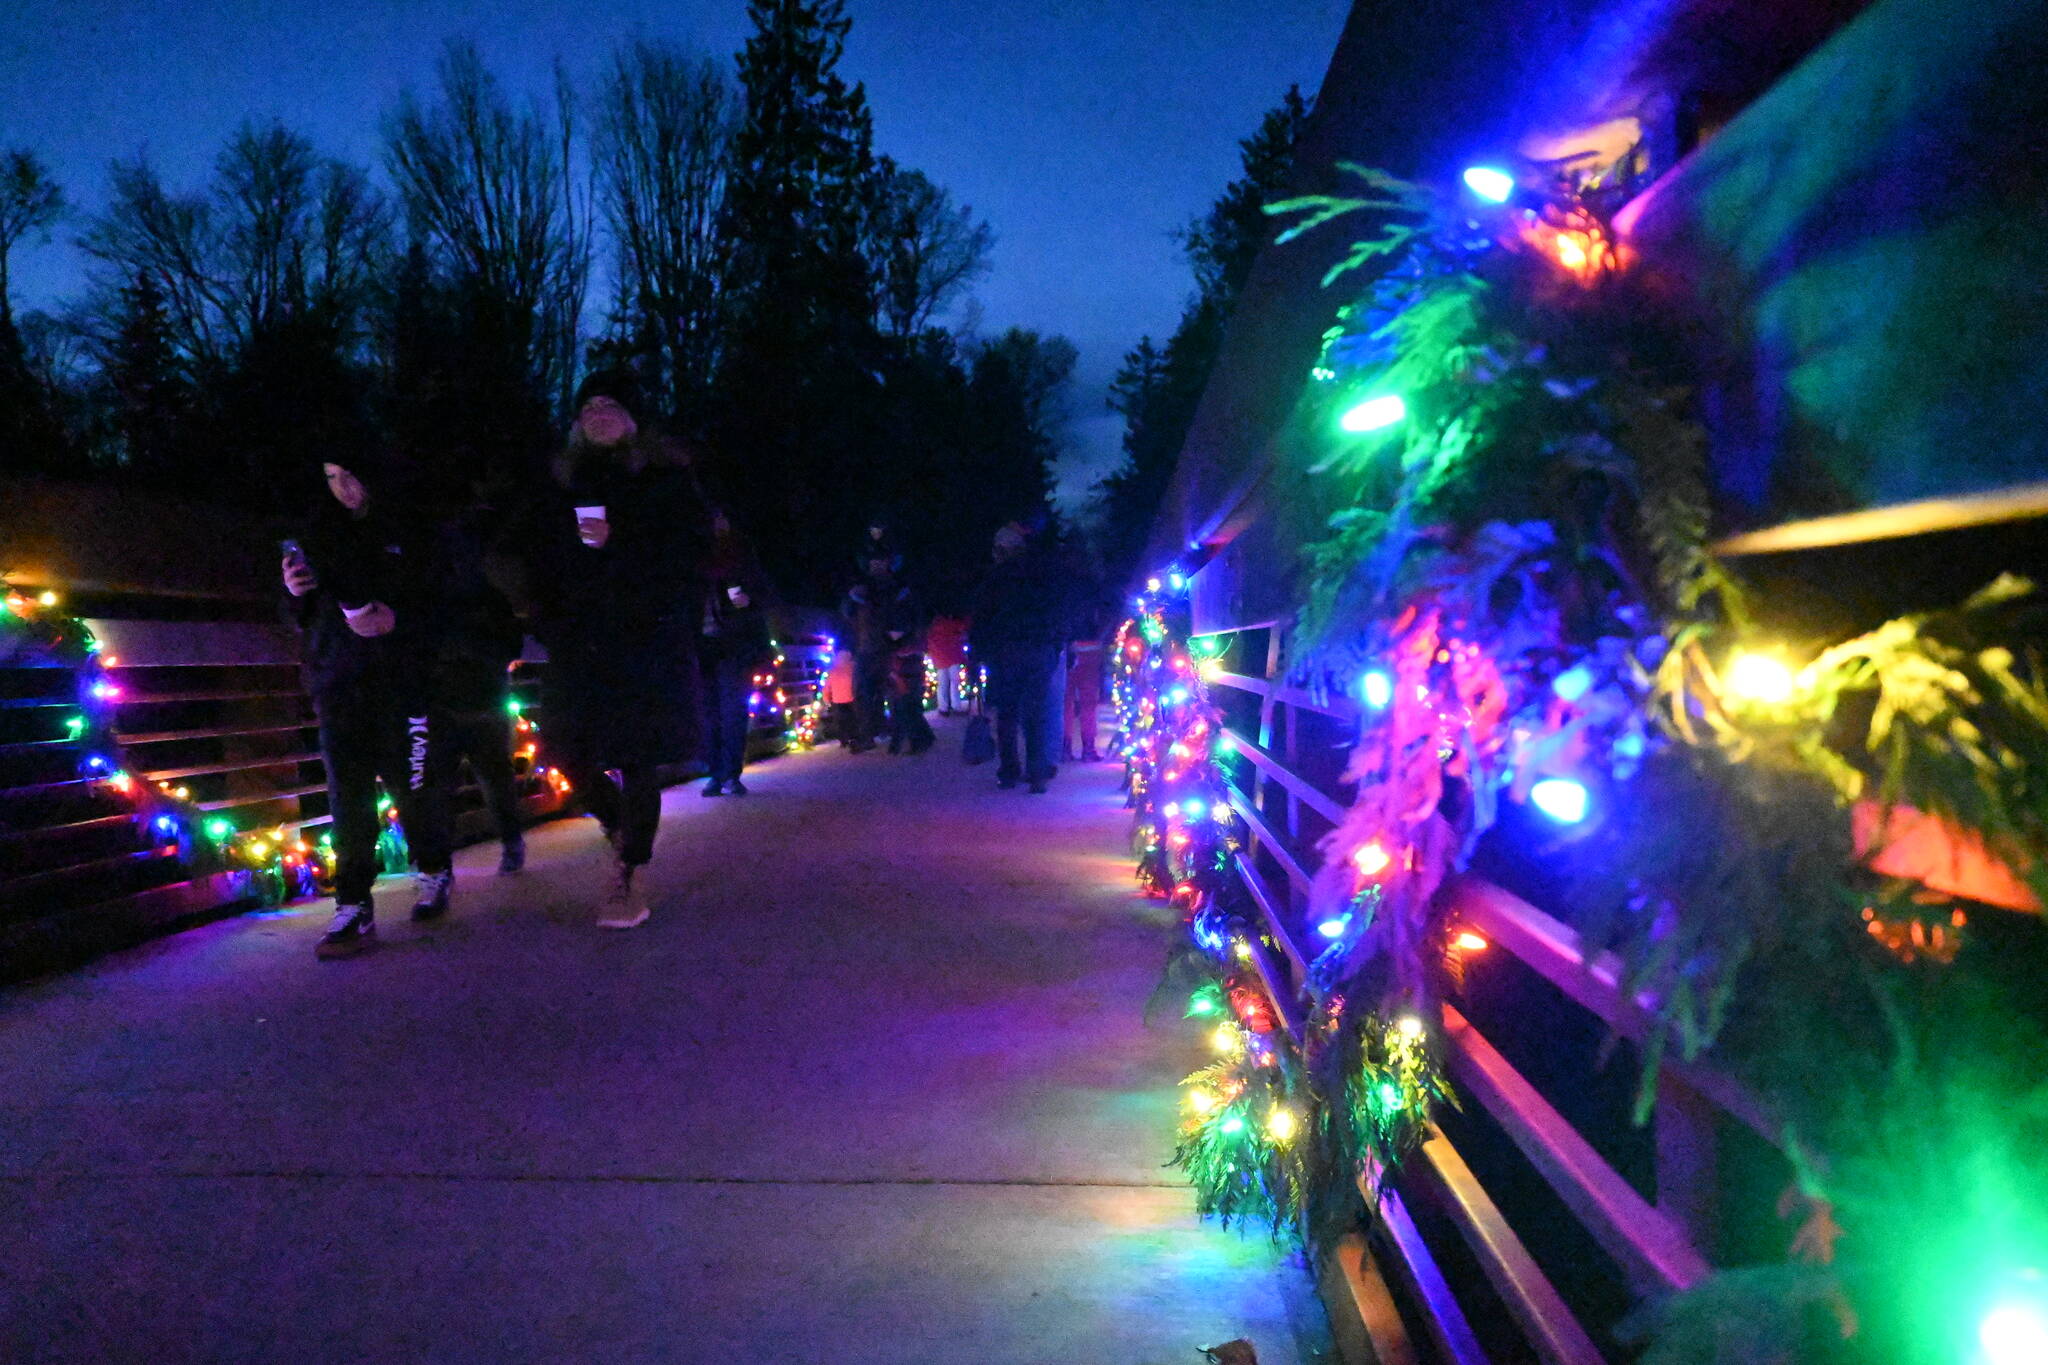 Sequim Gazette photo by Michael Dashiell / Visitors enjoy holiday-themed lighting the historic Railroad Bridge at Railroad Bridge Park on Saturday, Nov. 19. The annual River Center Holiday Nature Mart at the park’s Dungeness River Nature Center, held Saturday and Sunday Nov. 19-20, coincided with Saturday’s bridge lighting. The bridge’s lights will be on display each day at 3 p.m. through December.